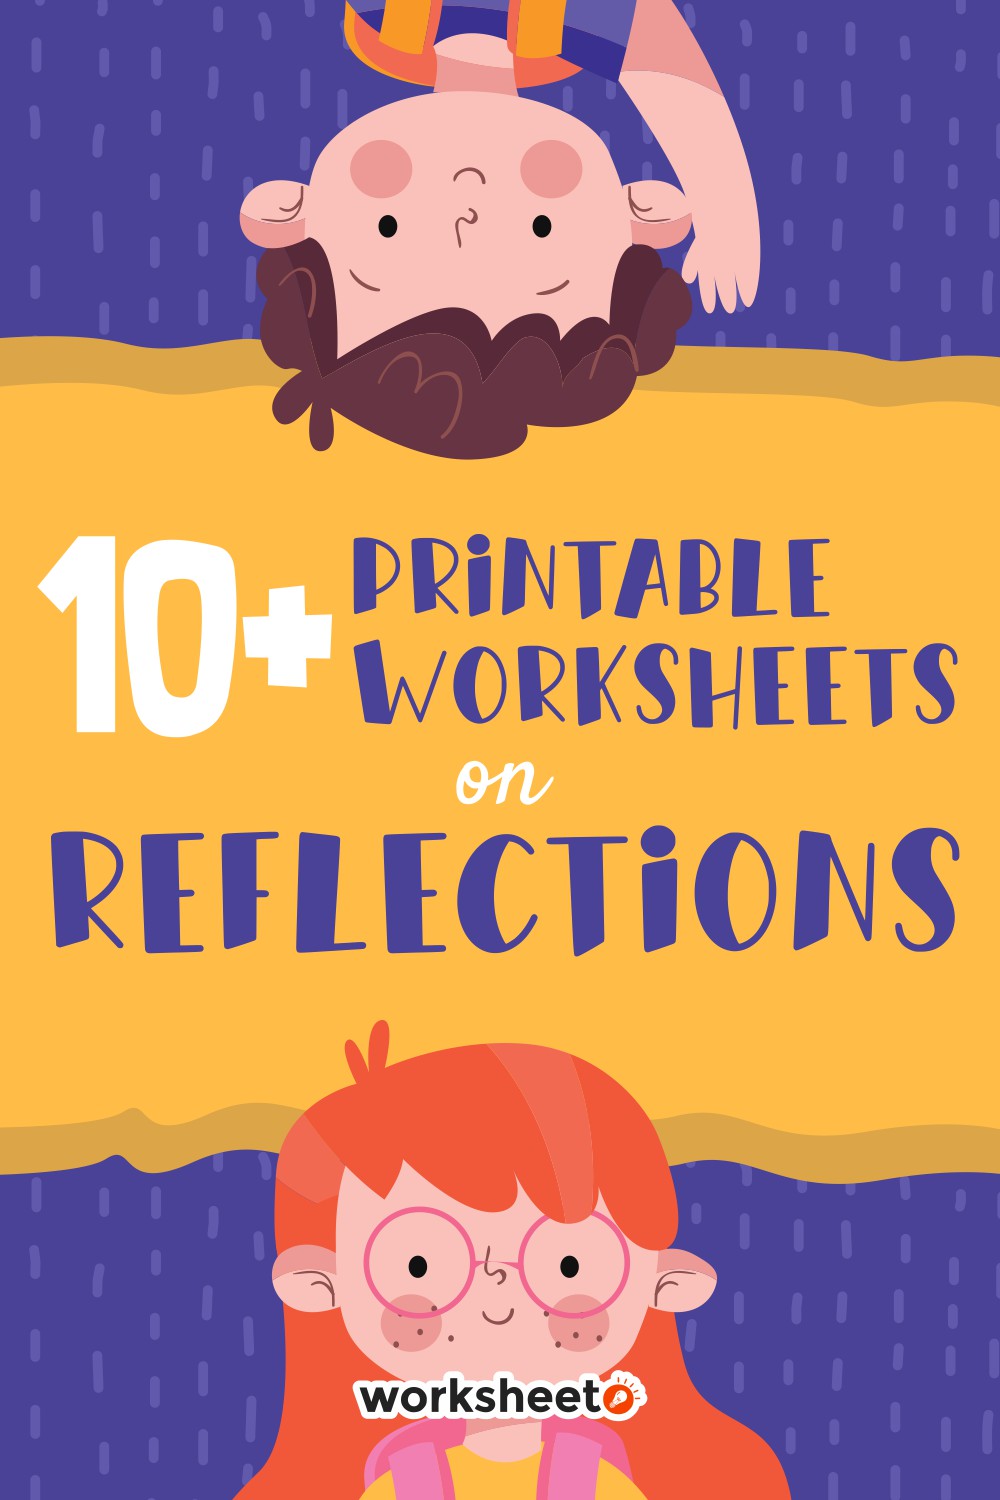 14 Images of Printable Worksheets On Reflections